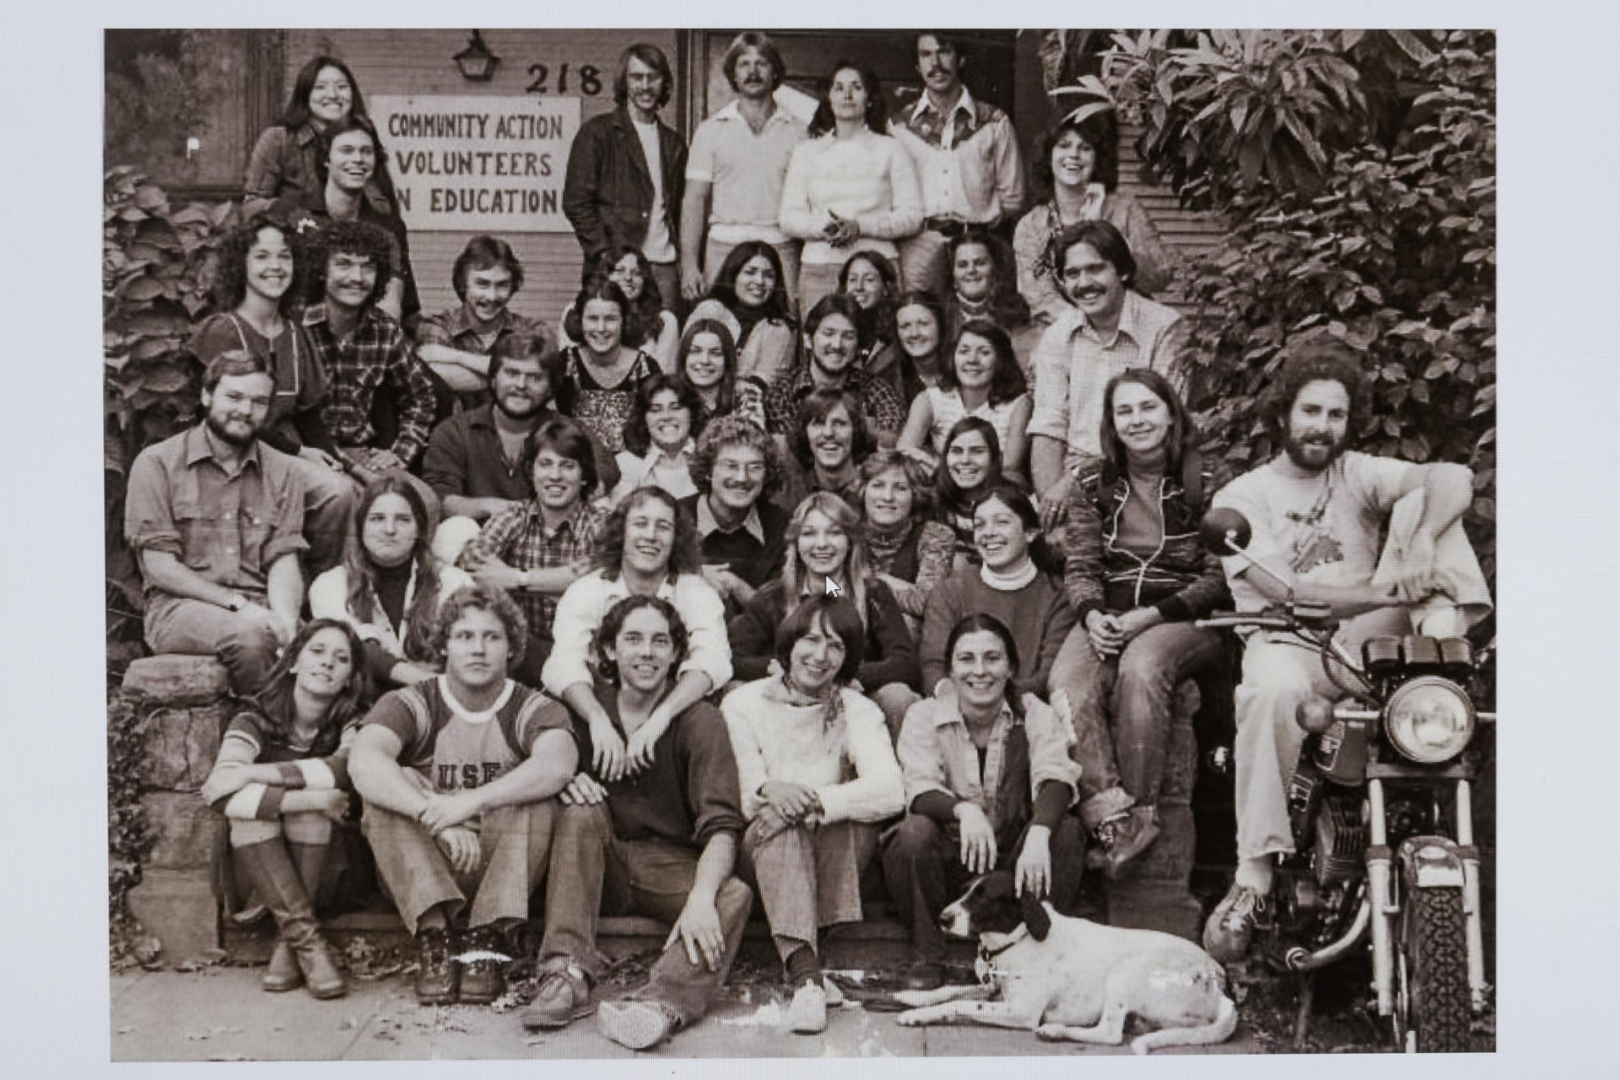 A historic photo of CAVE shows its staff sitting on the building stairs in the early 1970s.